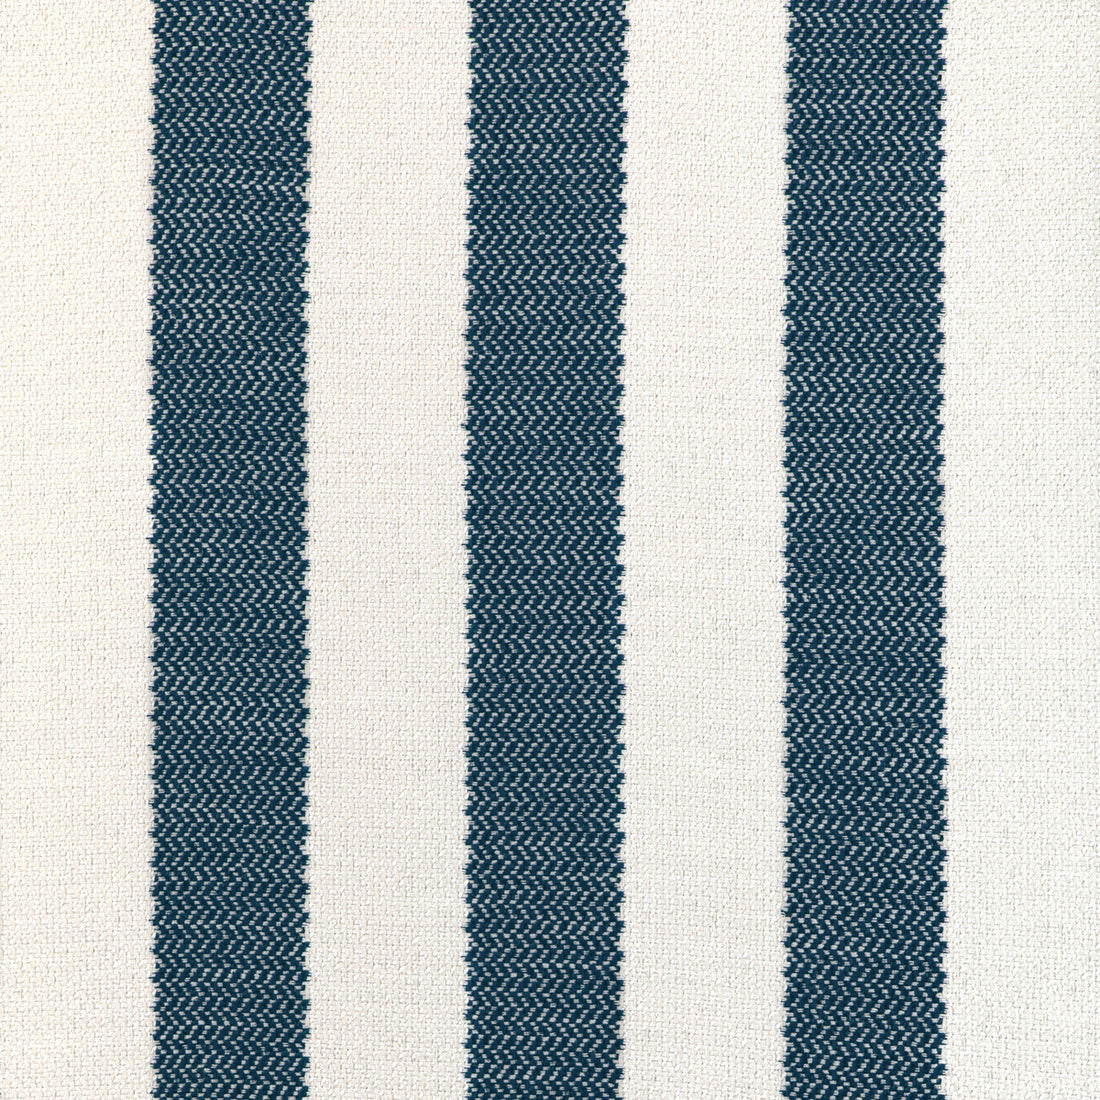 Rocky Top fabric in nautical color - pattern 37054.51.0 - by Kravet Design in the Thom Filicia Latitude collection